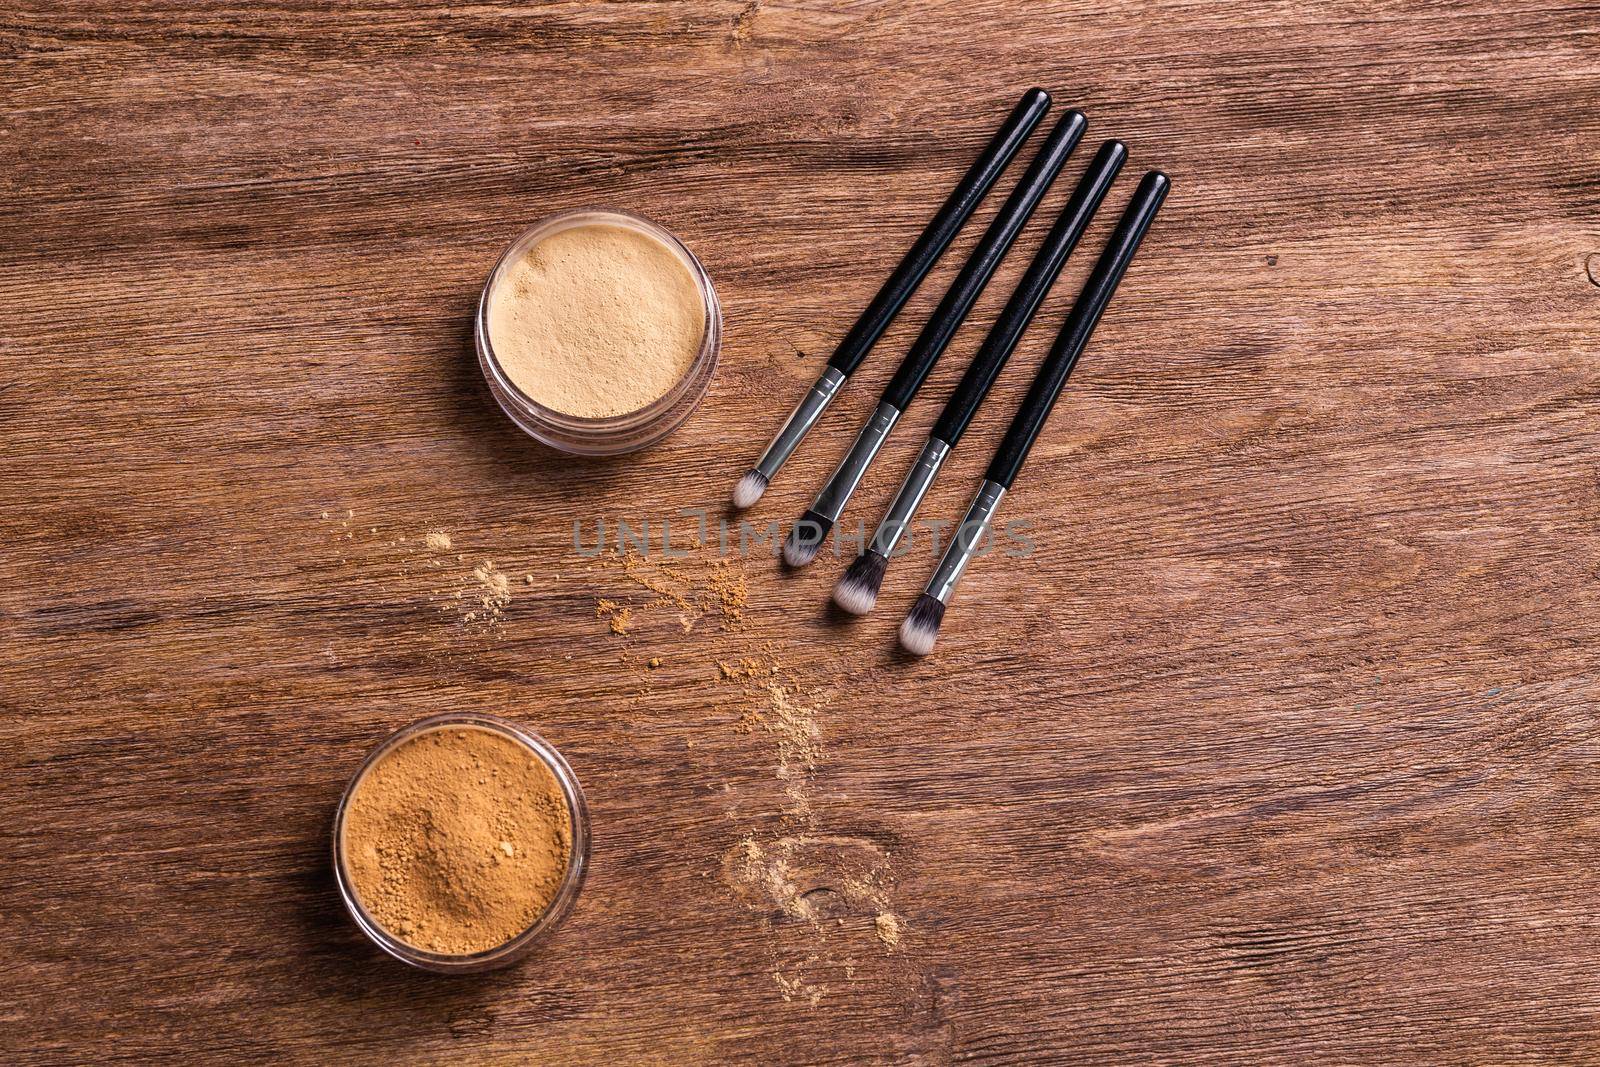 Mineral powder foundation with brushes on a wooden background with copy space. Eco-friendly and organic beauty products by Satura86